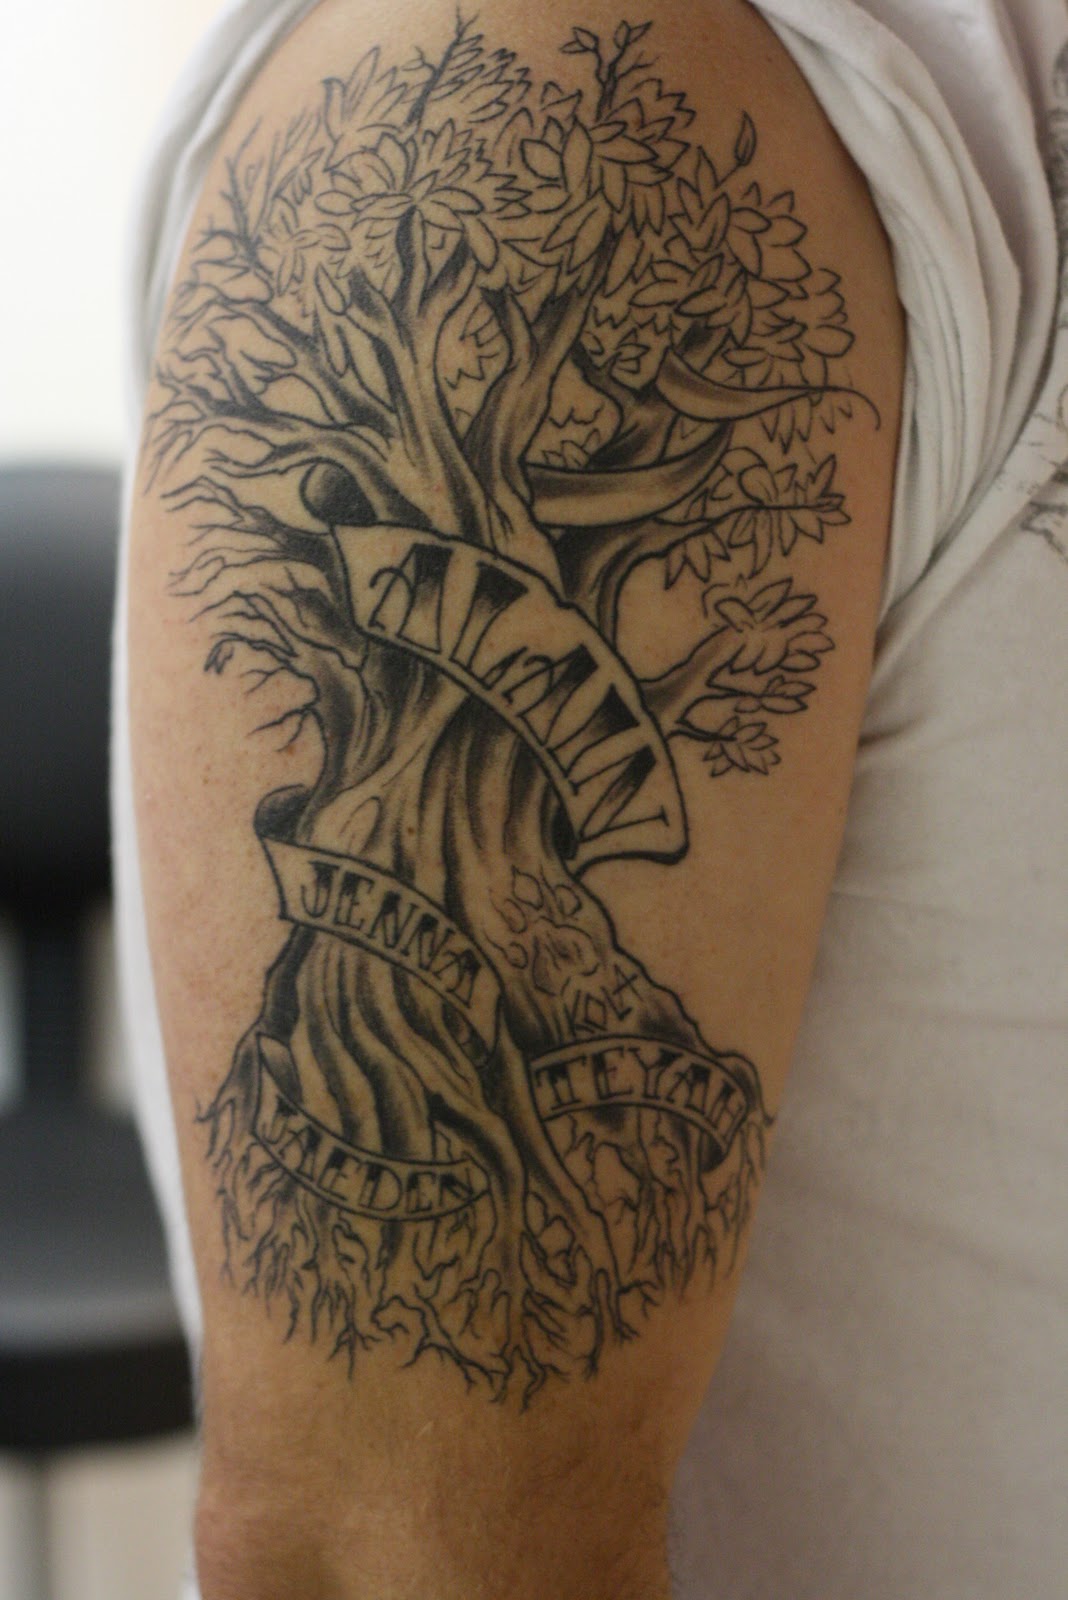 Family Tree Tattoos Designs, Ideas and Meaning | Tattoos For You